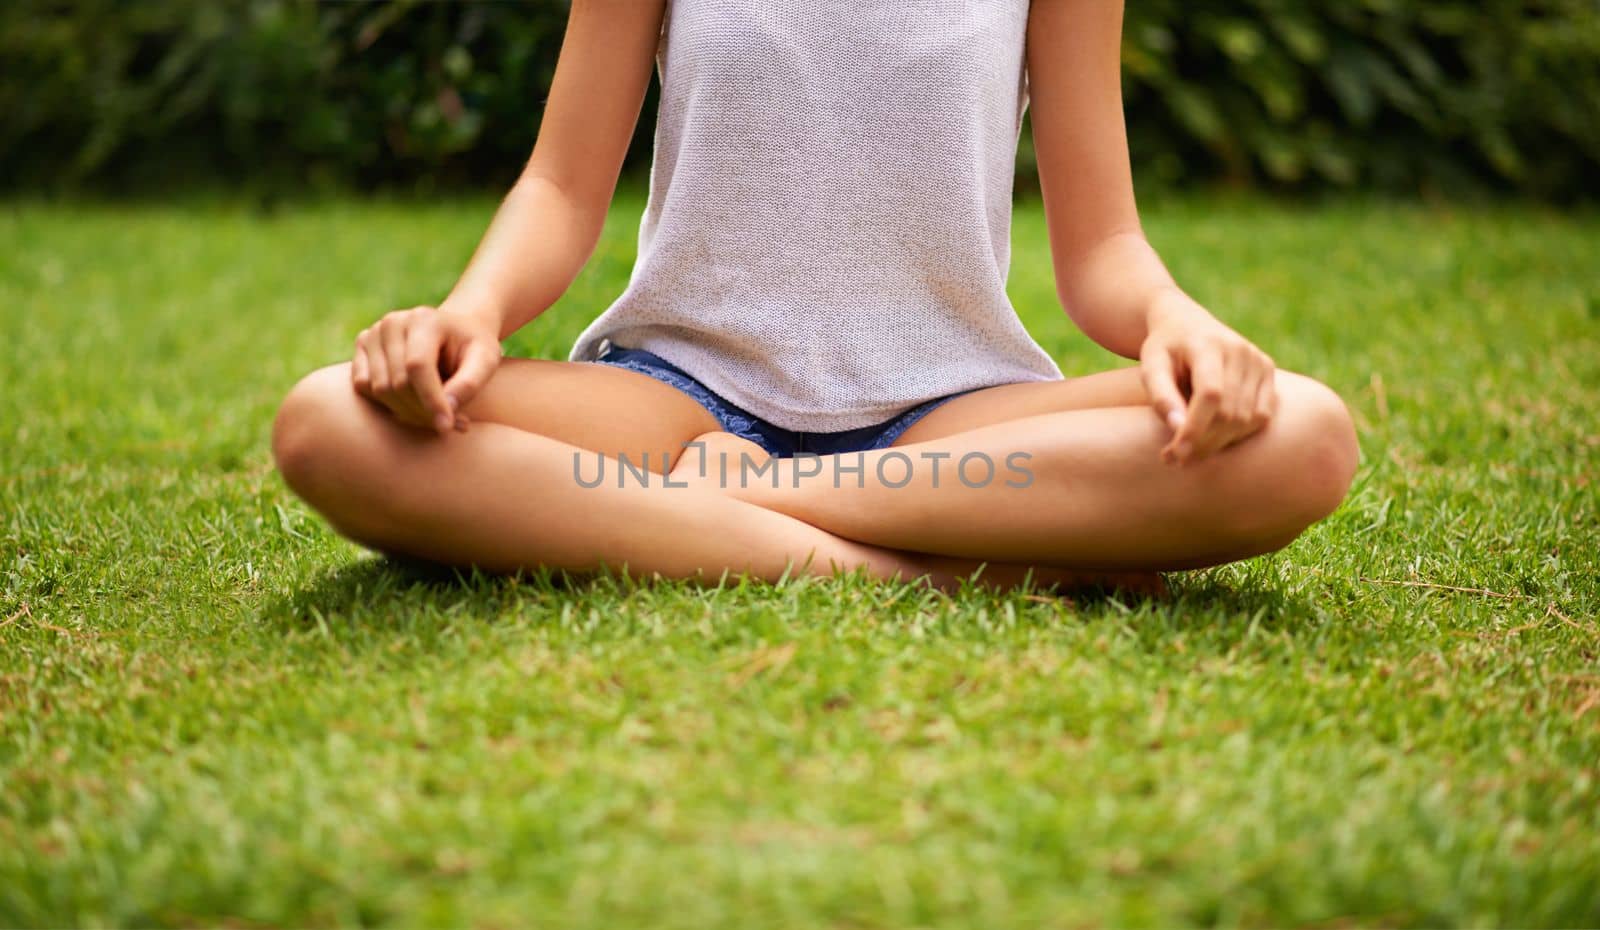 Finding her centre. a young woman meditating in the garden